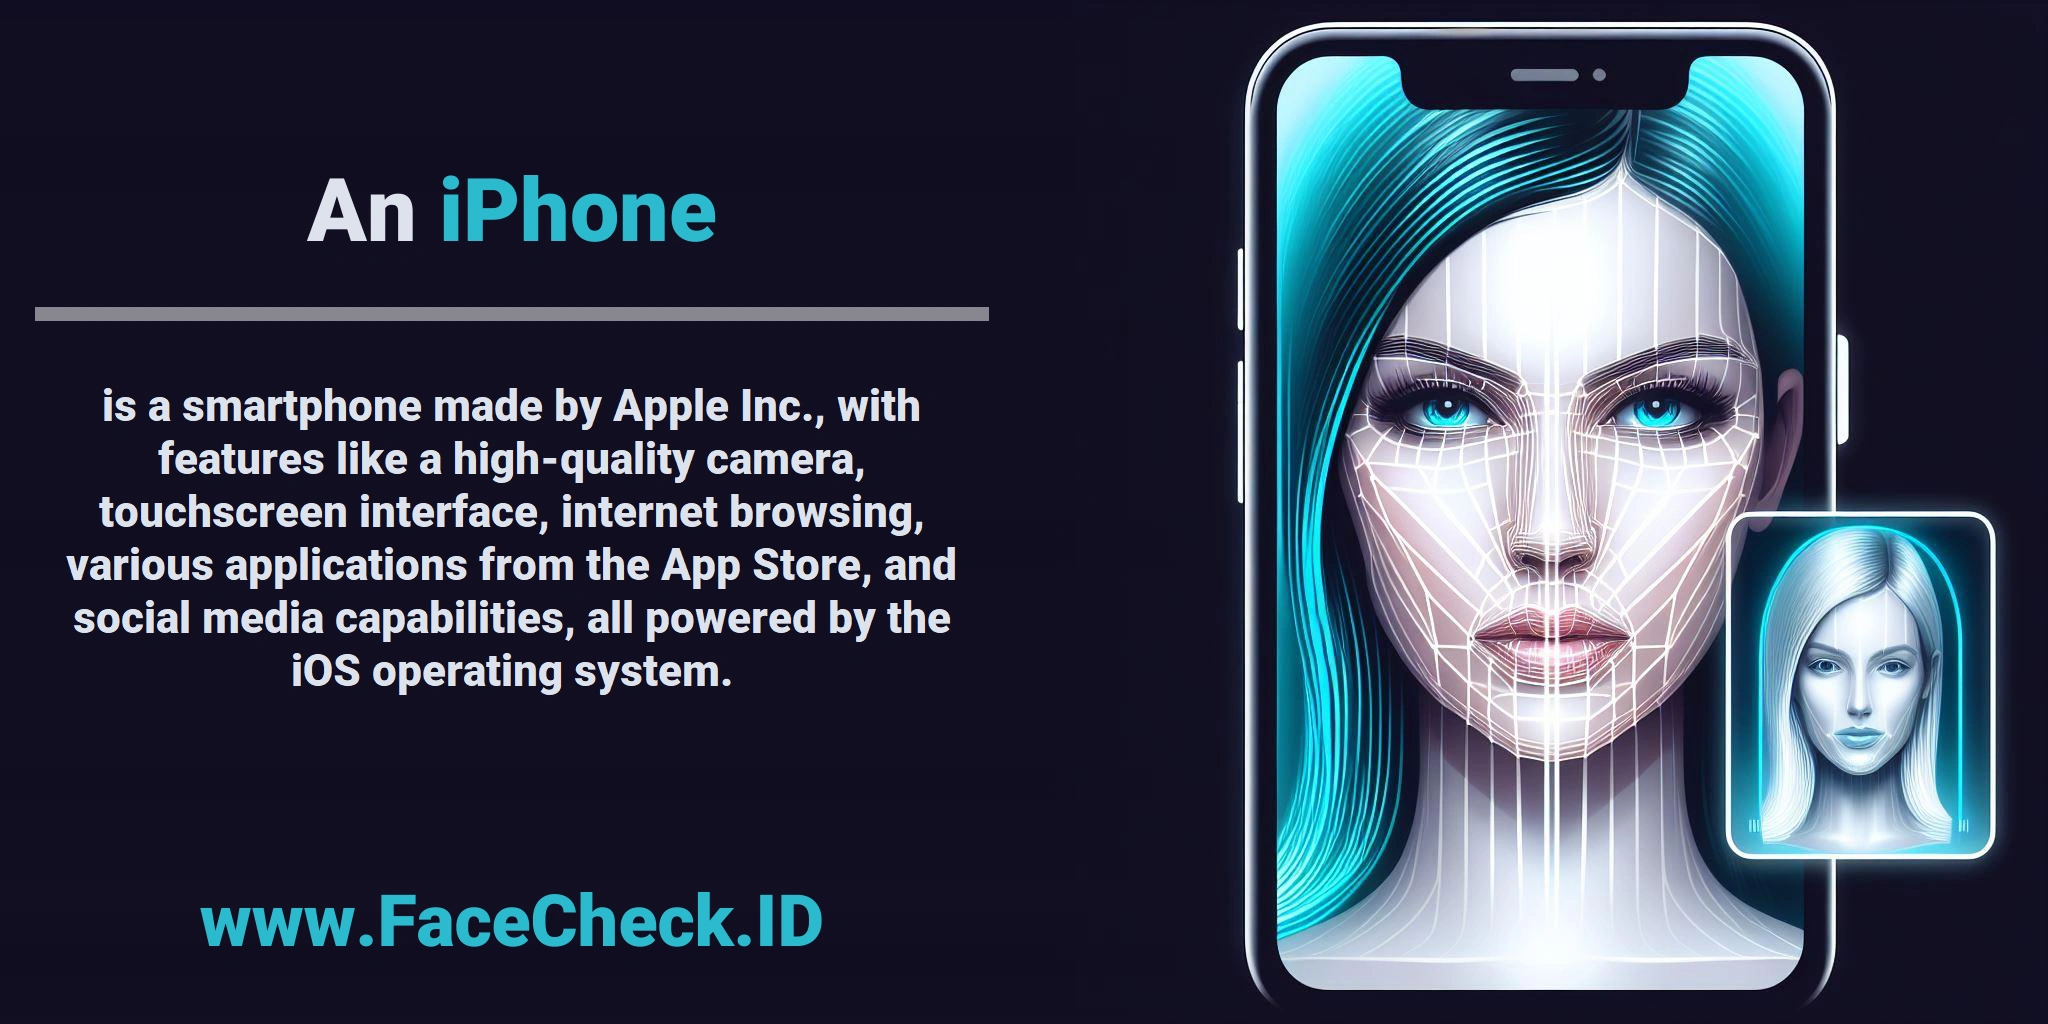 An <b>iPhone</b> is a smartphone made by Apple Inc., with features like a high-quality camera, touchscreen interface, internet browsing, various applications from the App Store, and social media capabilities, all powered by the iOS operating system.